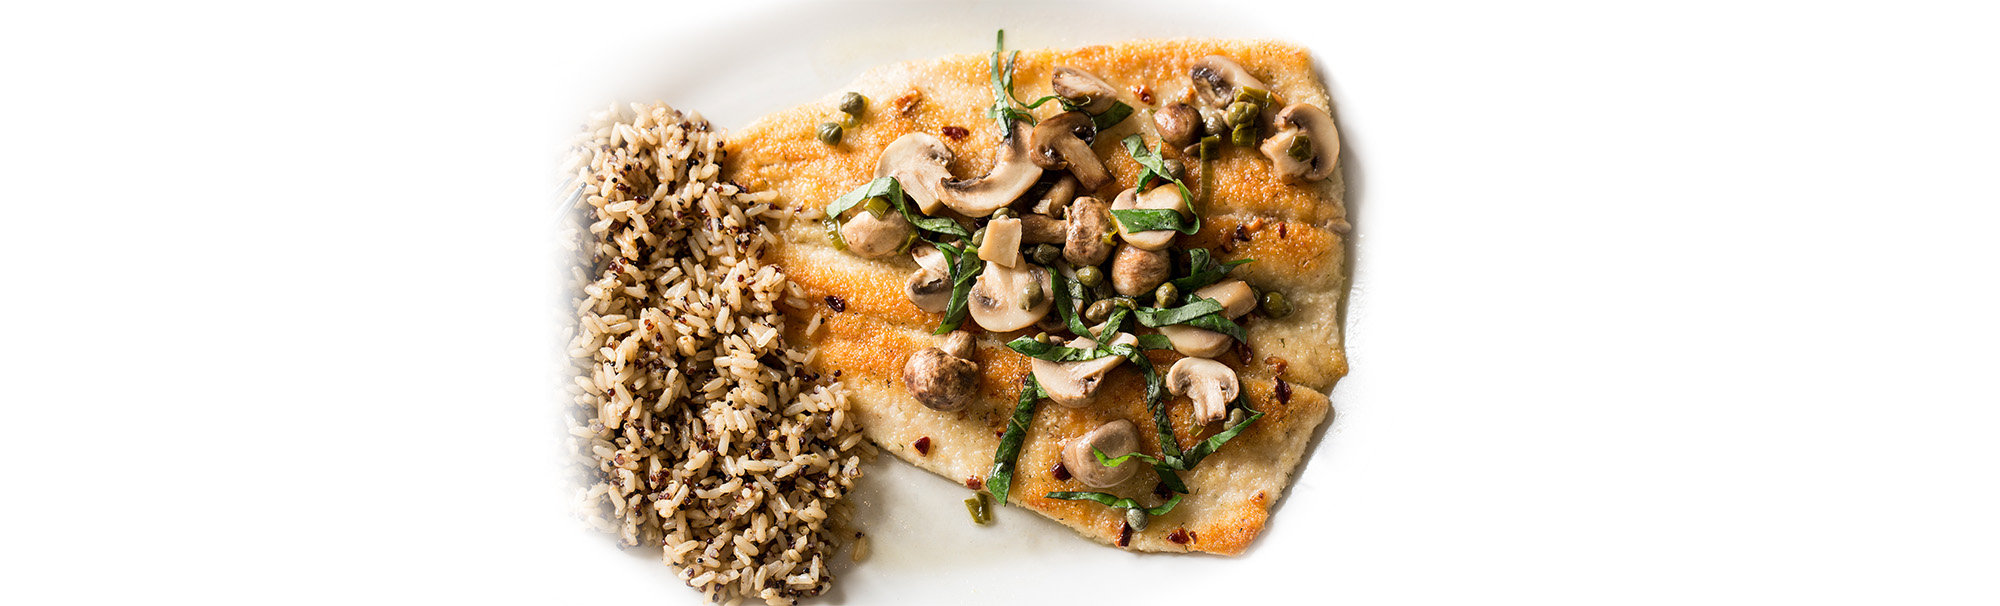 Trout and mushrooms with rice